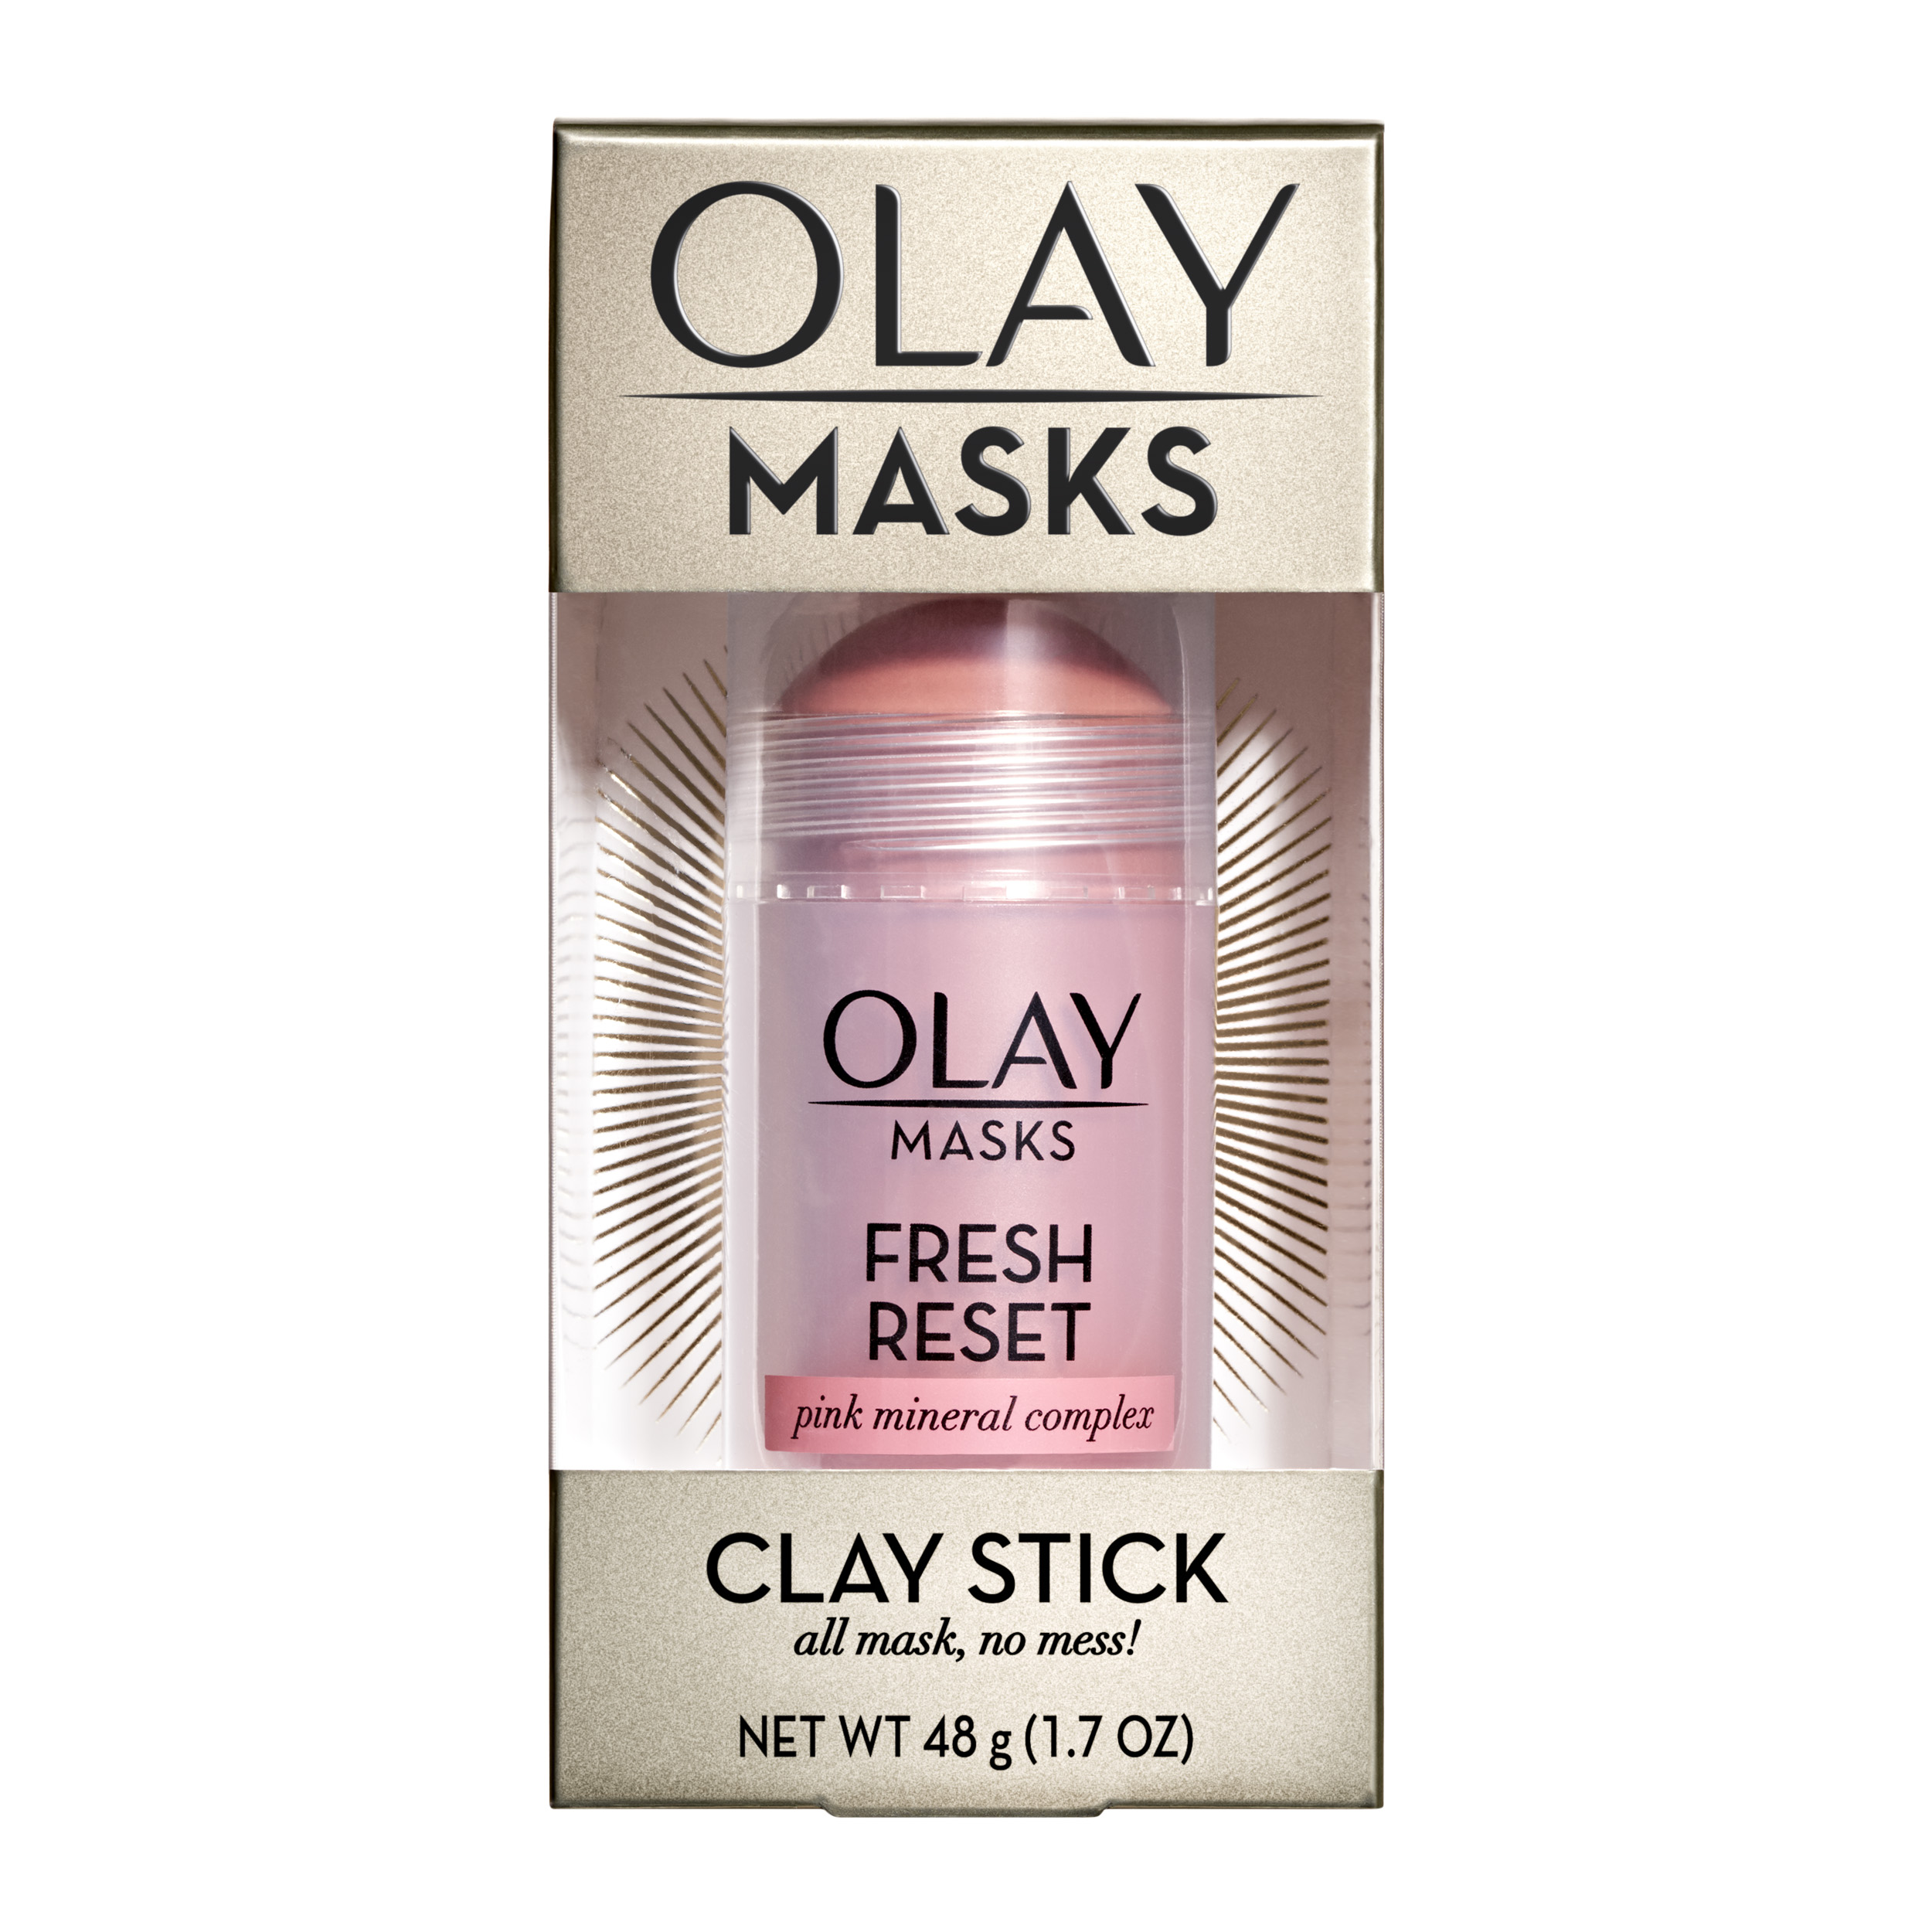 Olay Face Mask Stick, Fresh Reset, Pink Mineral Clay Complex, 1.7 oz - image 9 of 12